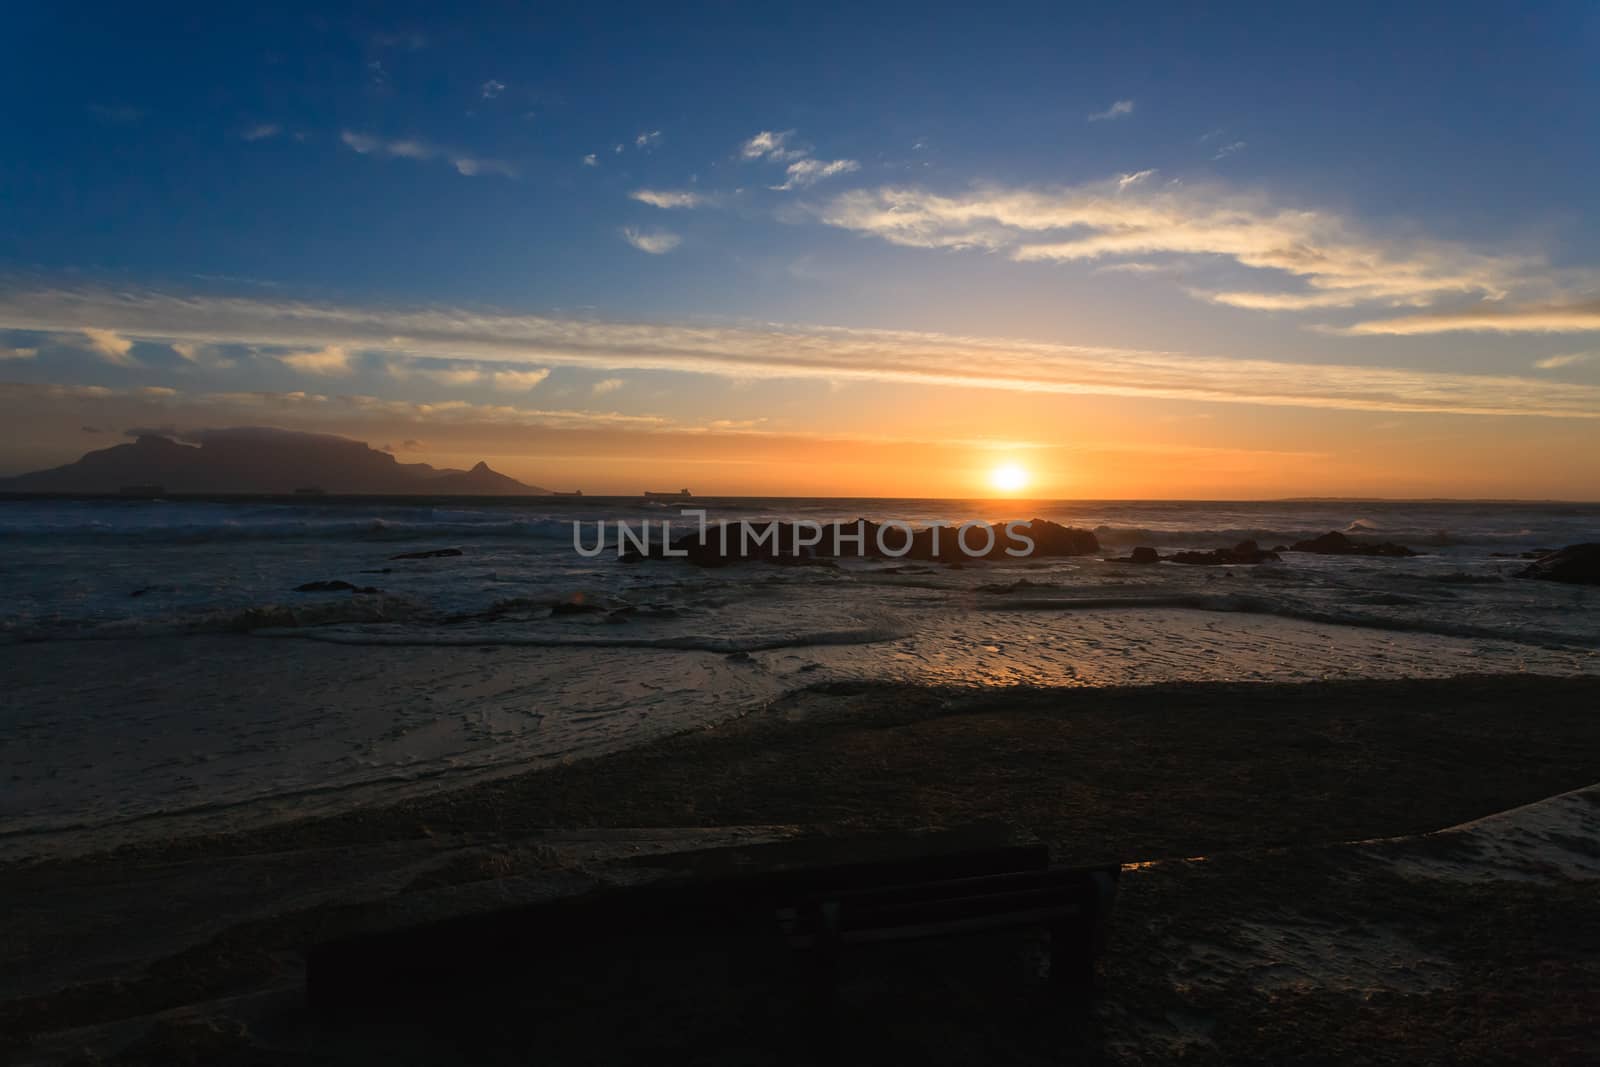 A view of the Table Mountain, Cape town